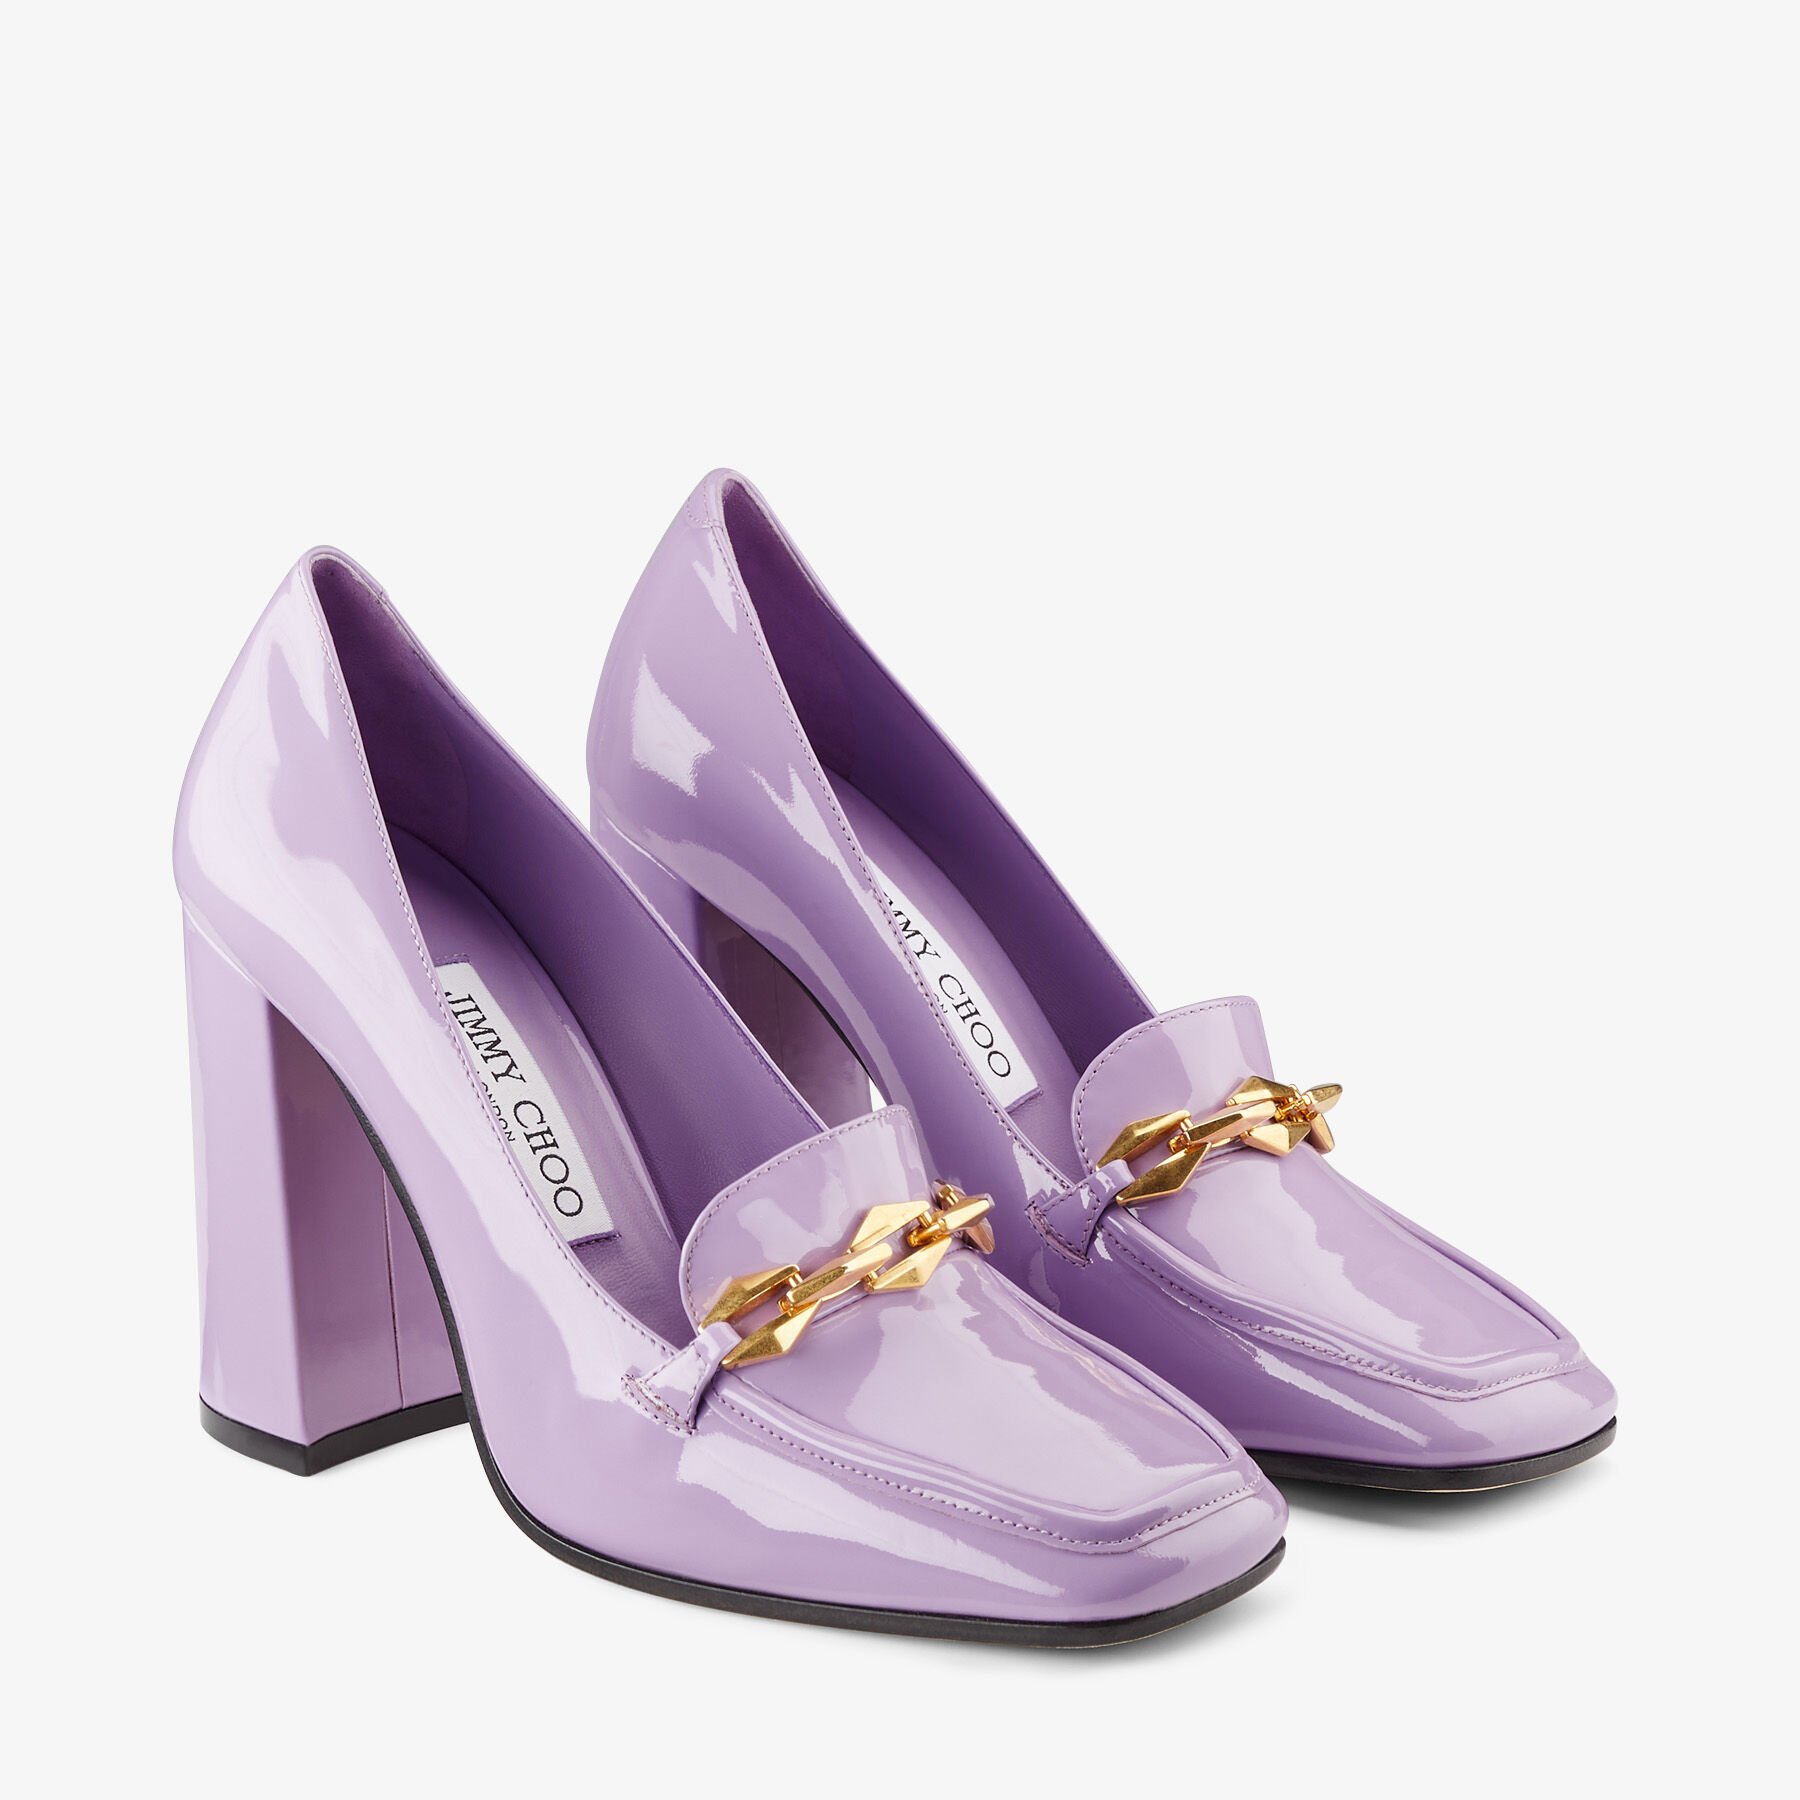 DIAMOND TILDA 100 | Wisteria Soft Patent Leather Loafers with 